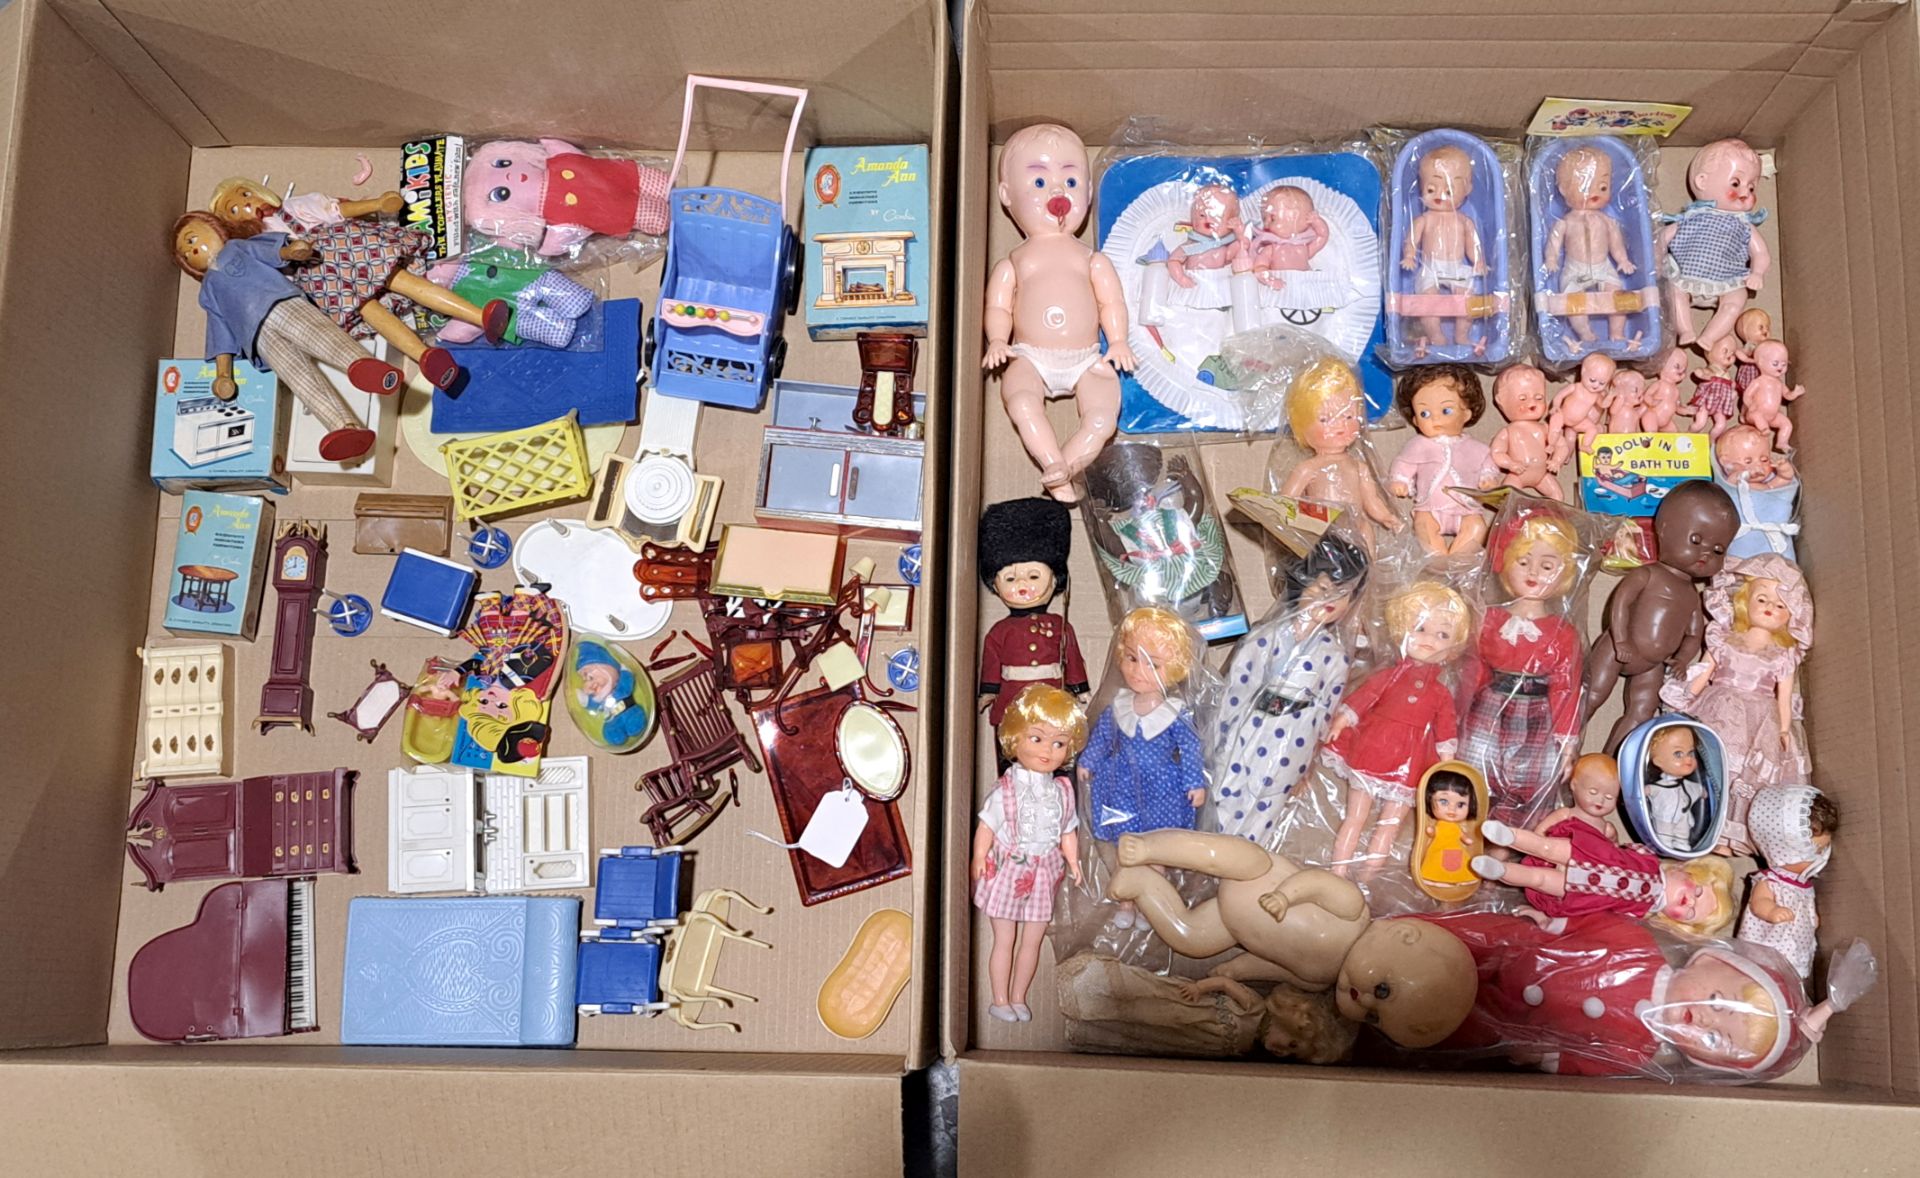 Collection of vintage celluloid, hard plastic and vinyl dolls, plus doll's house furniture